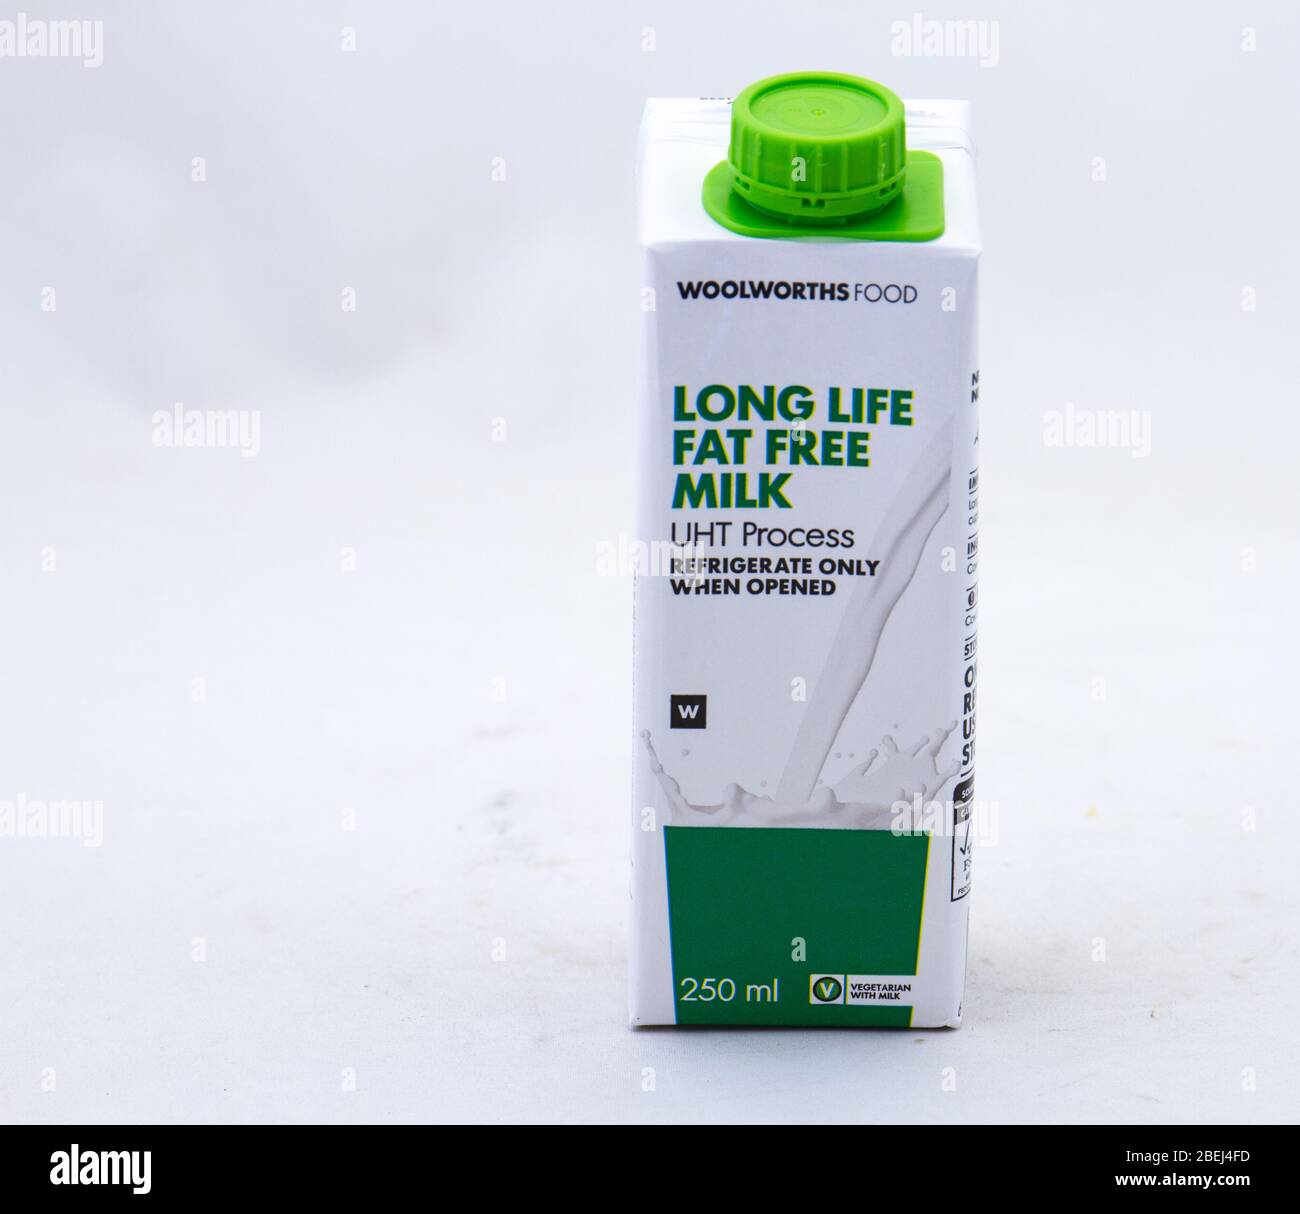 https://c8.alamy.com/comp/2BEJ4FD/alberton-south-africa-a-box-of-woolworths-food-longlife-fat-free-milk-isolated-on-a-clear-background-image-with-copy-space-2BEJ4FD.jpg